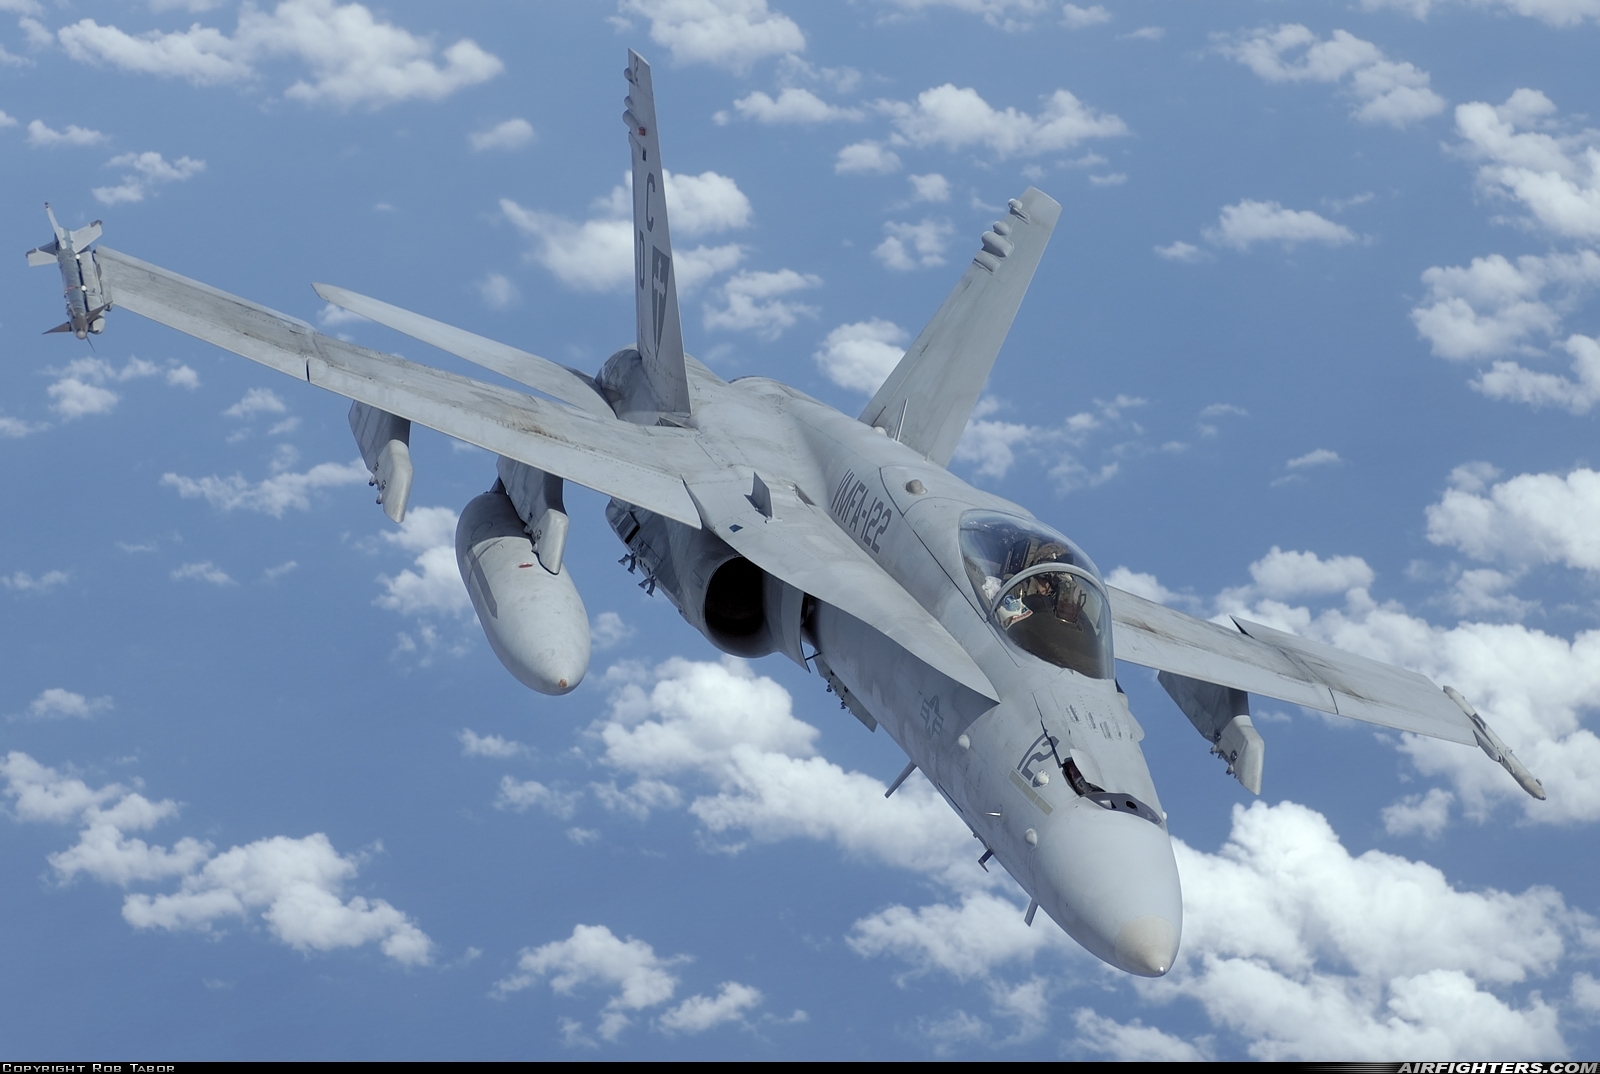 USA - Marines McDonnell Douglas F/A-18C Hornet 164277 at In Flight, International Airspace